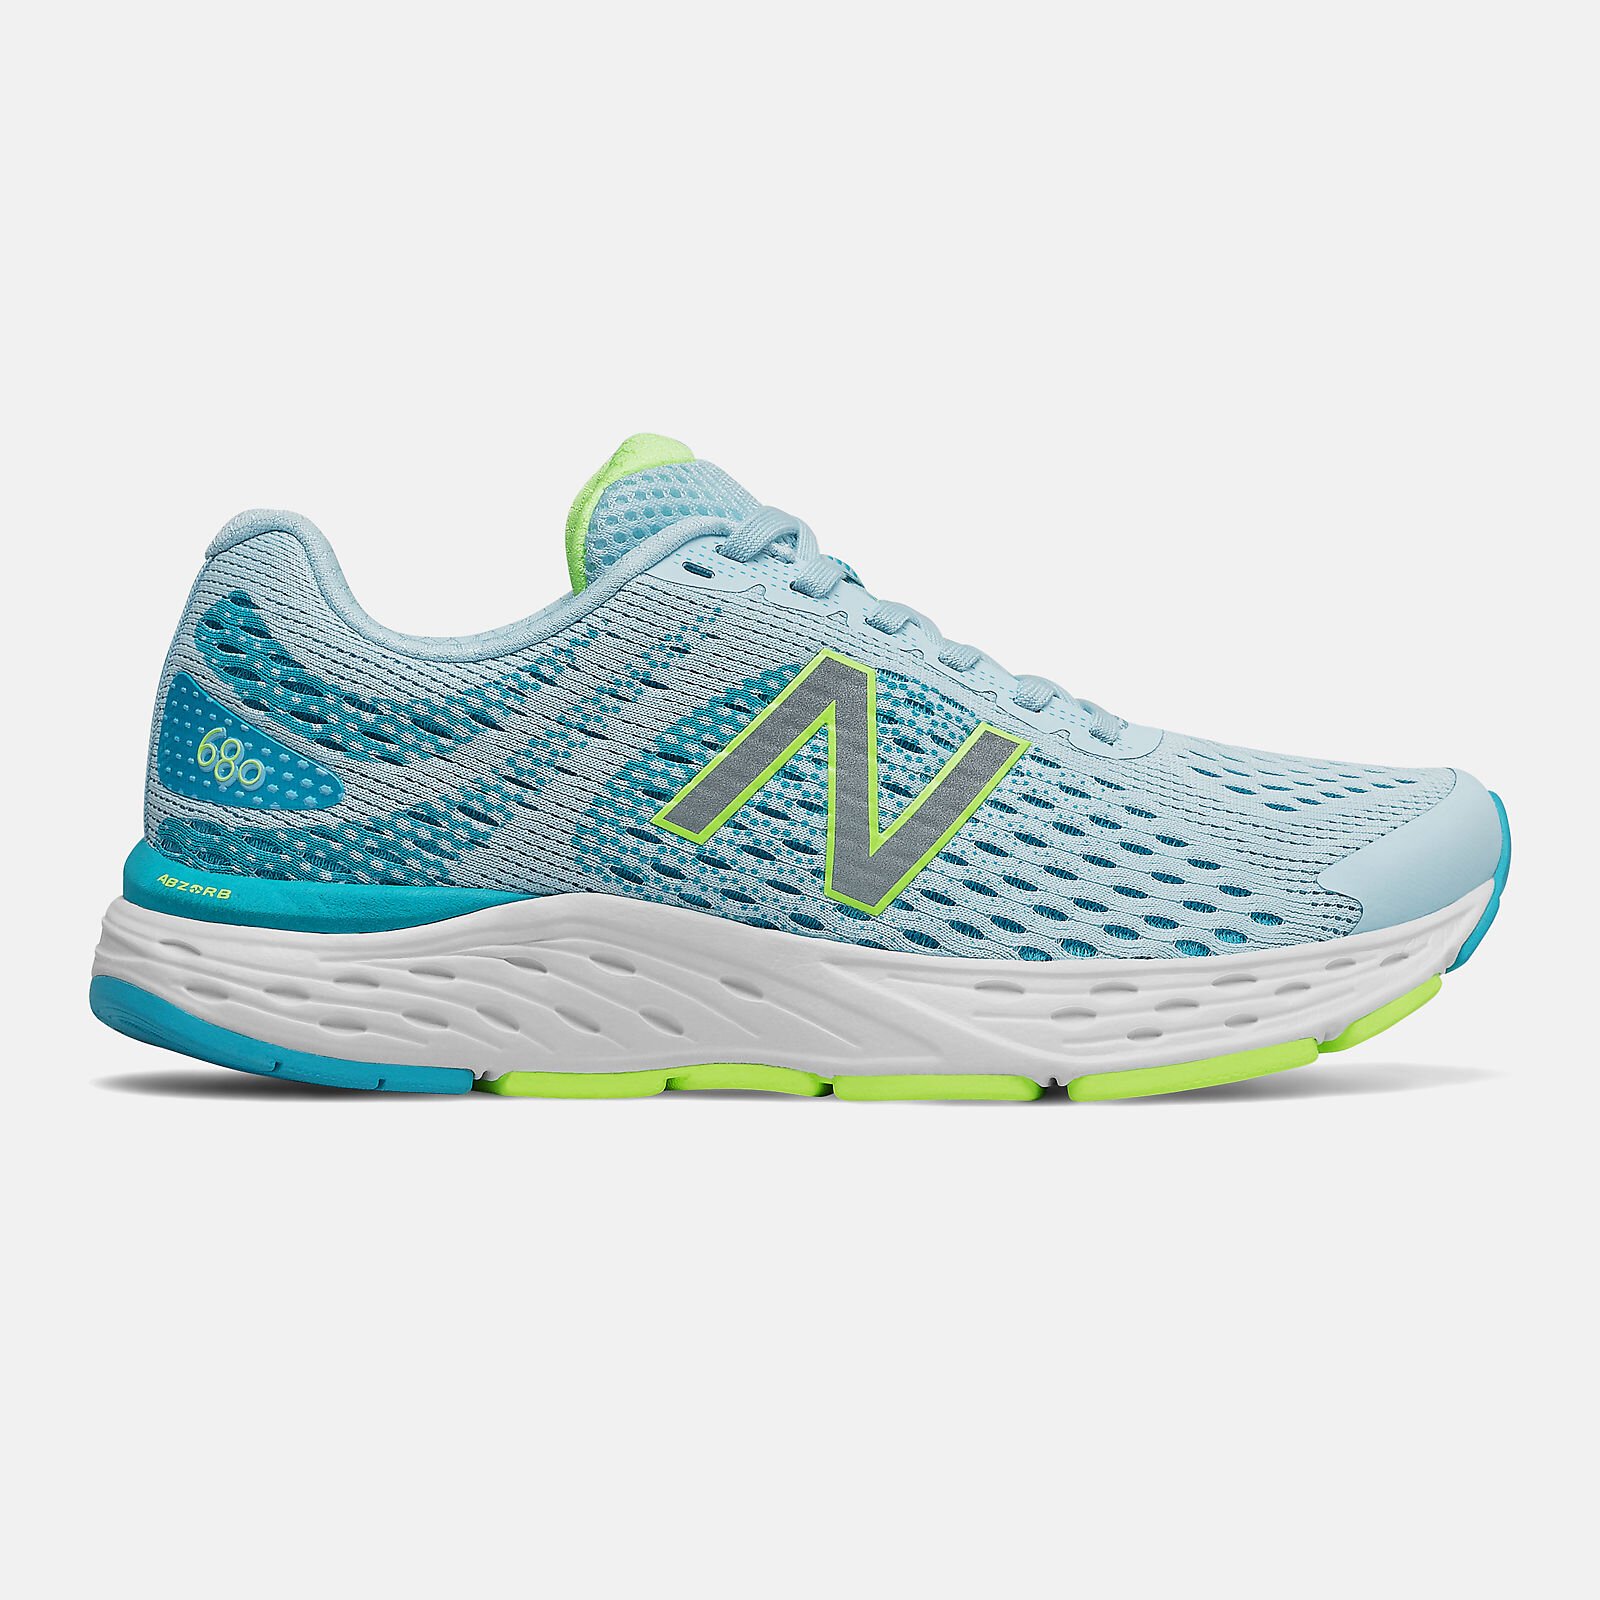 stores that sell new balance running shoes